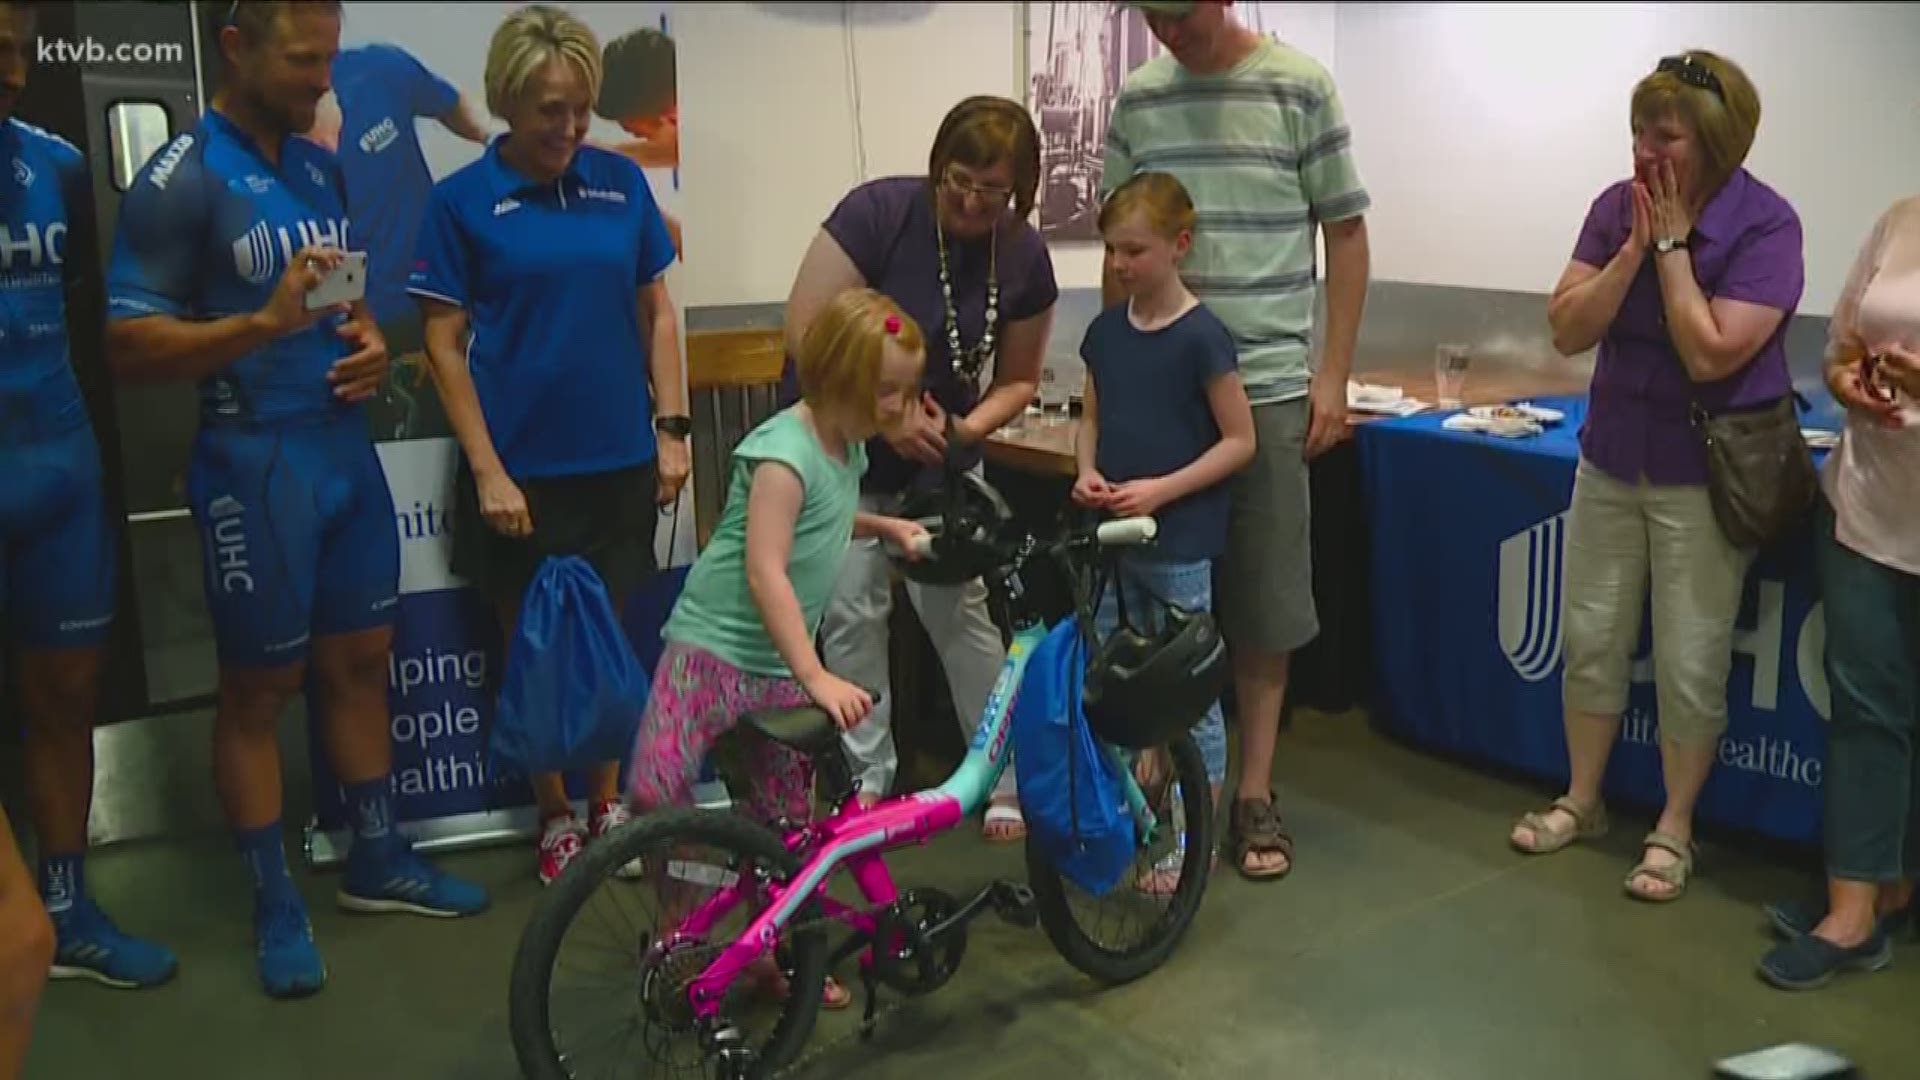 Claire Jensen received several special gifts, including a bike and a grant to help pay for the speech therapy sessions that have helped her.